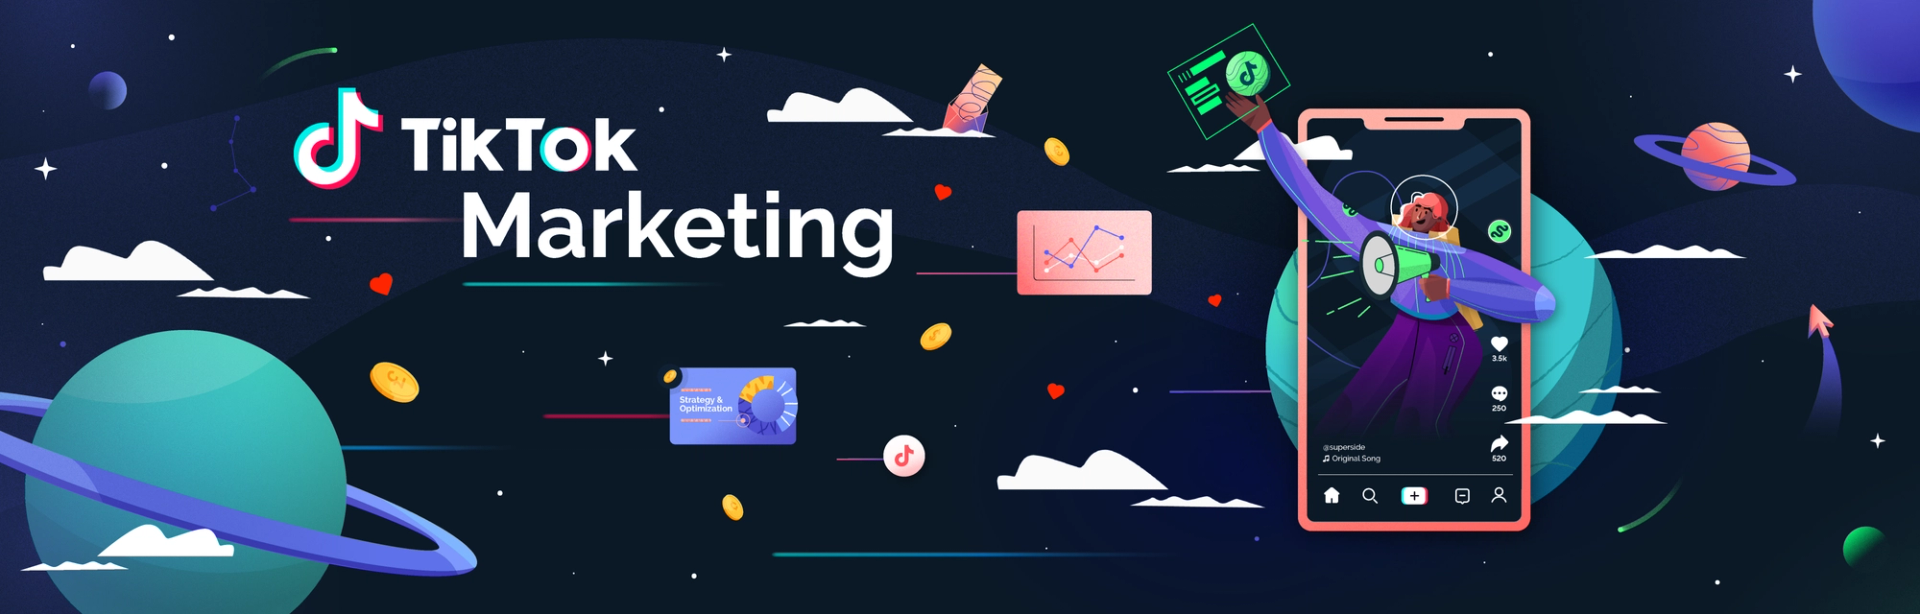 TikTok Marketing For Business With Examples - Superside